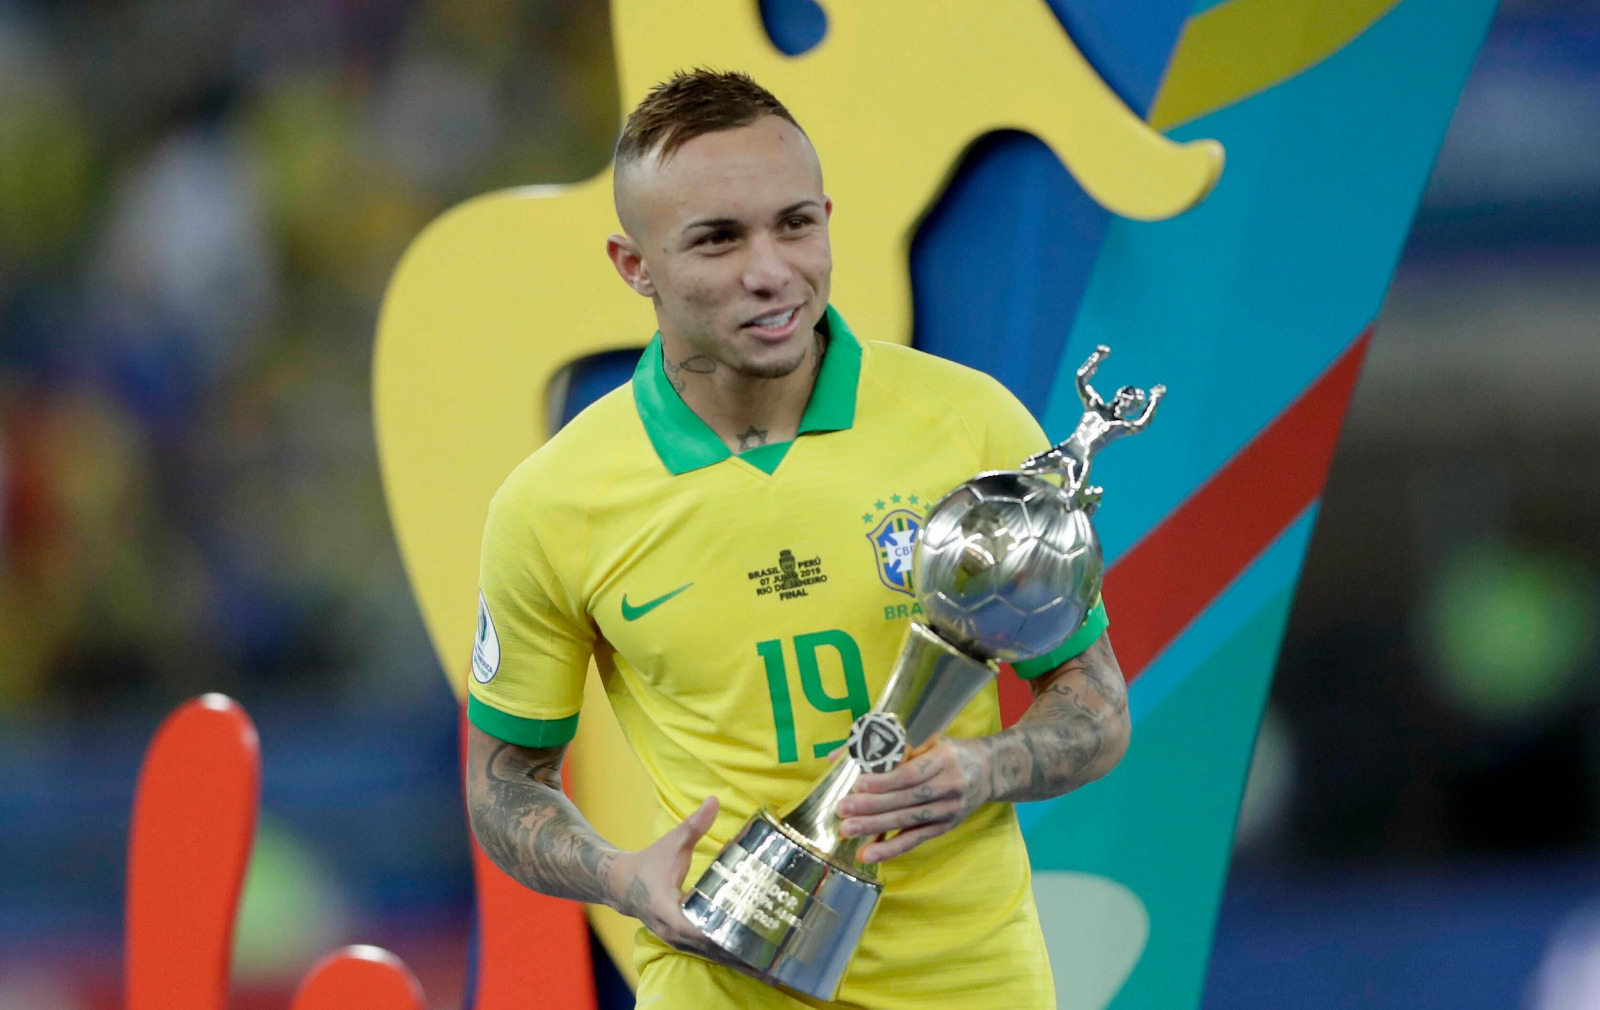 Everton Wants Everton Soares, but So Does Newcastle